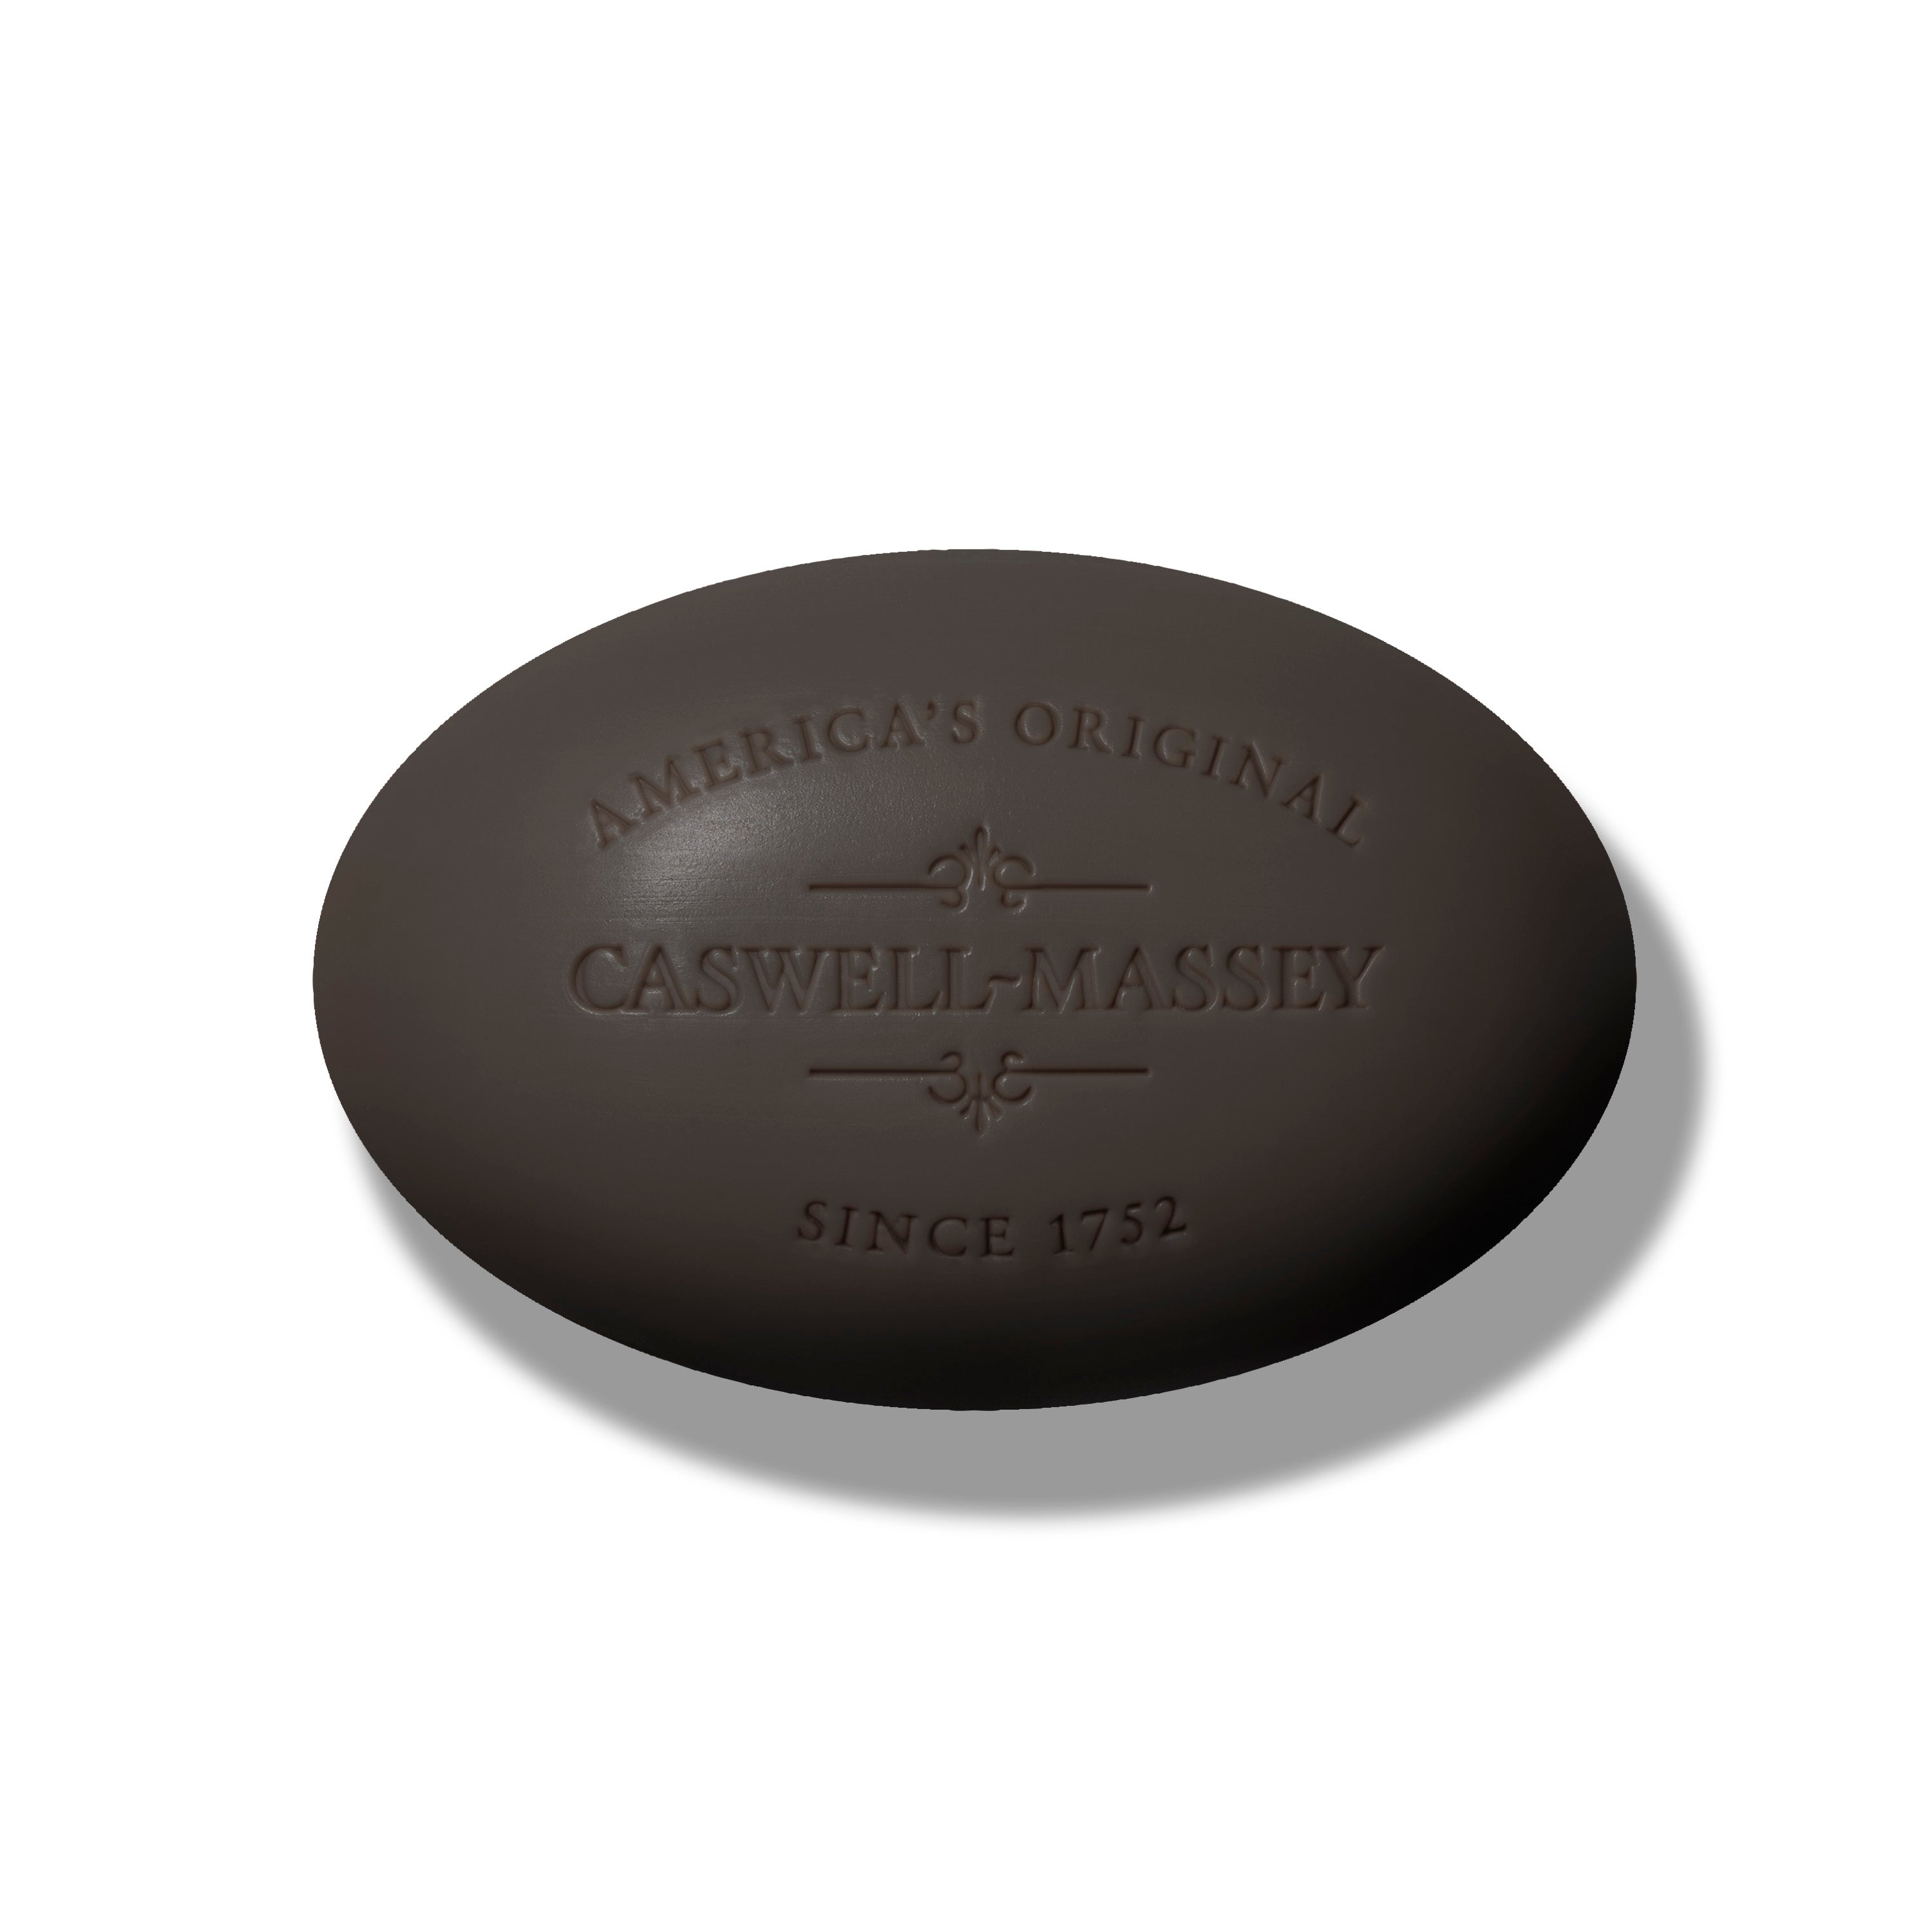 Caswell-Massey: OAIRE Black Clay Bar Soap, luxury bar soap 5.8oz oval bath soap in black color